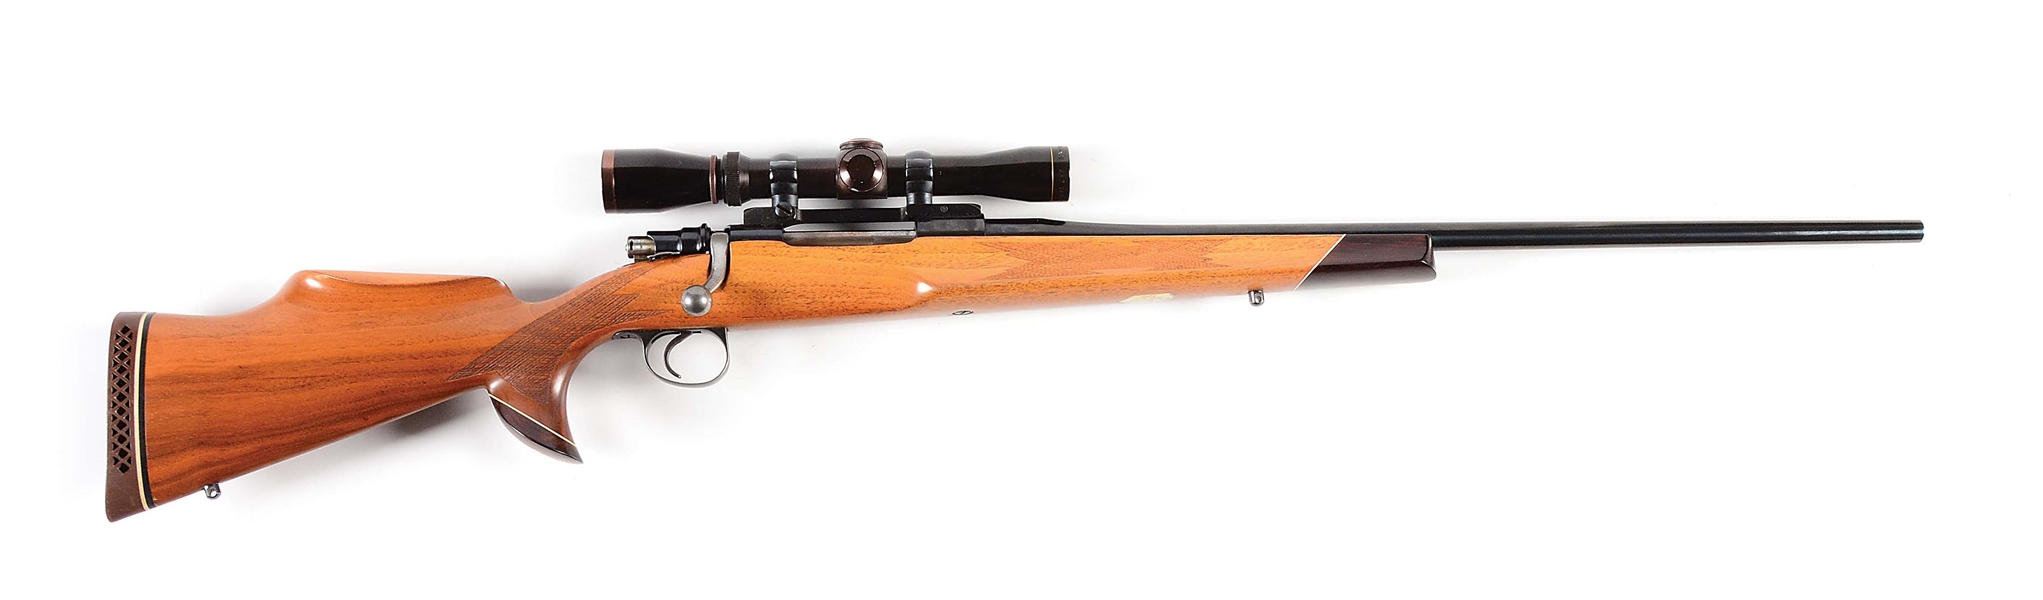 (C) WINSLOW ARMS CO. .243 WINCHESTER BOLT ACTION RIFLE WITH LEUPOLD SCOPE.